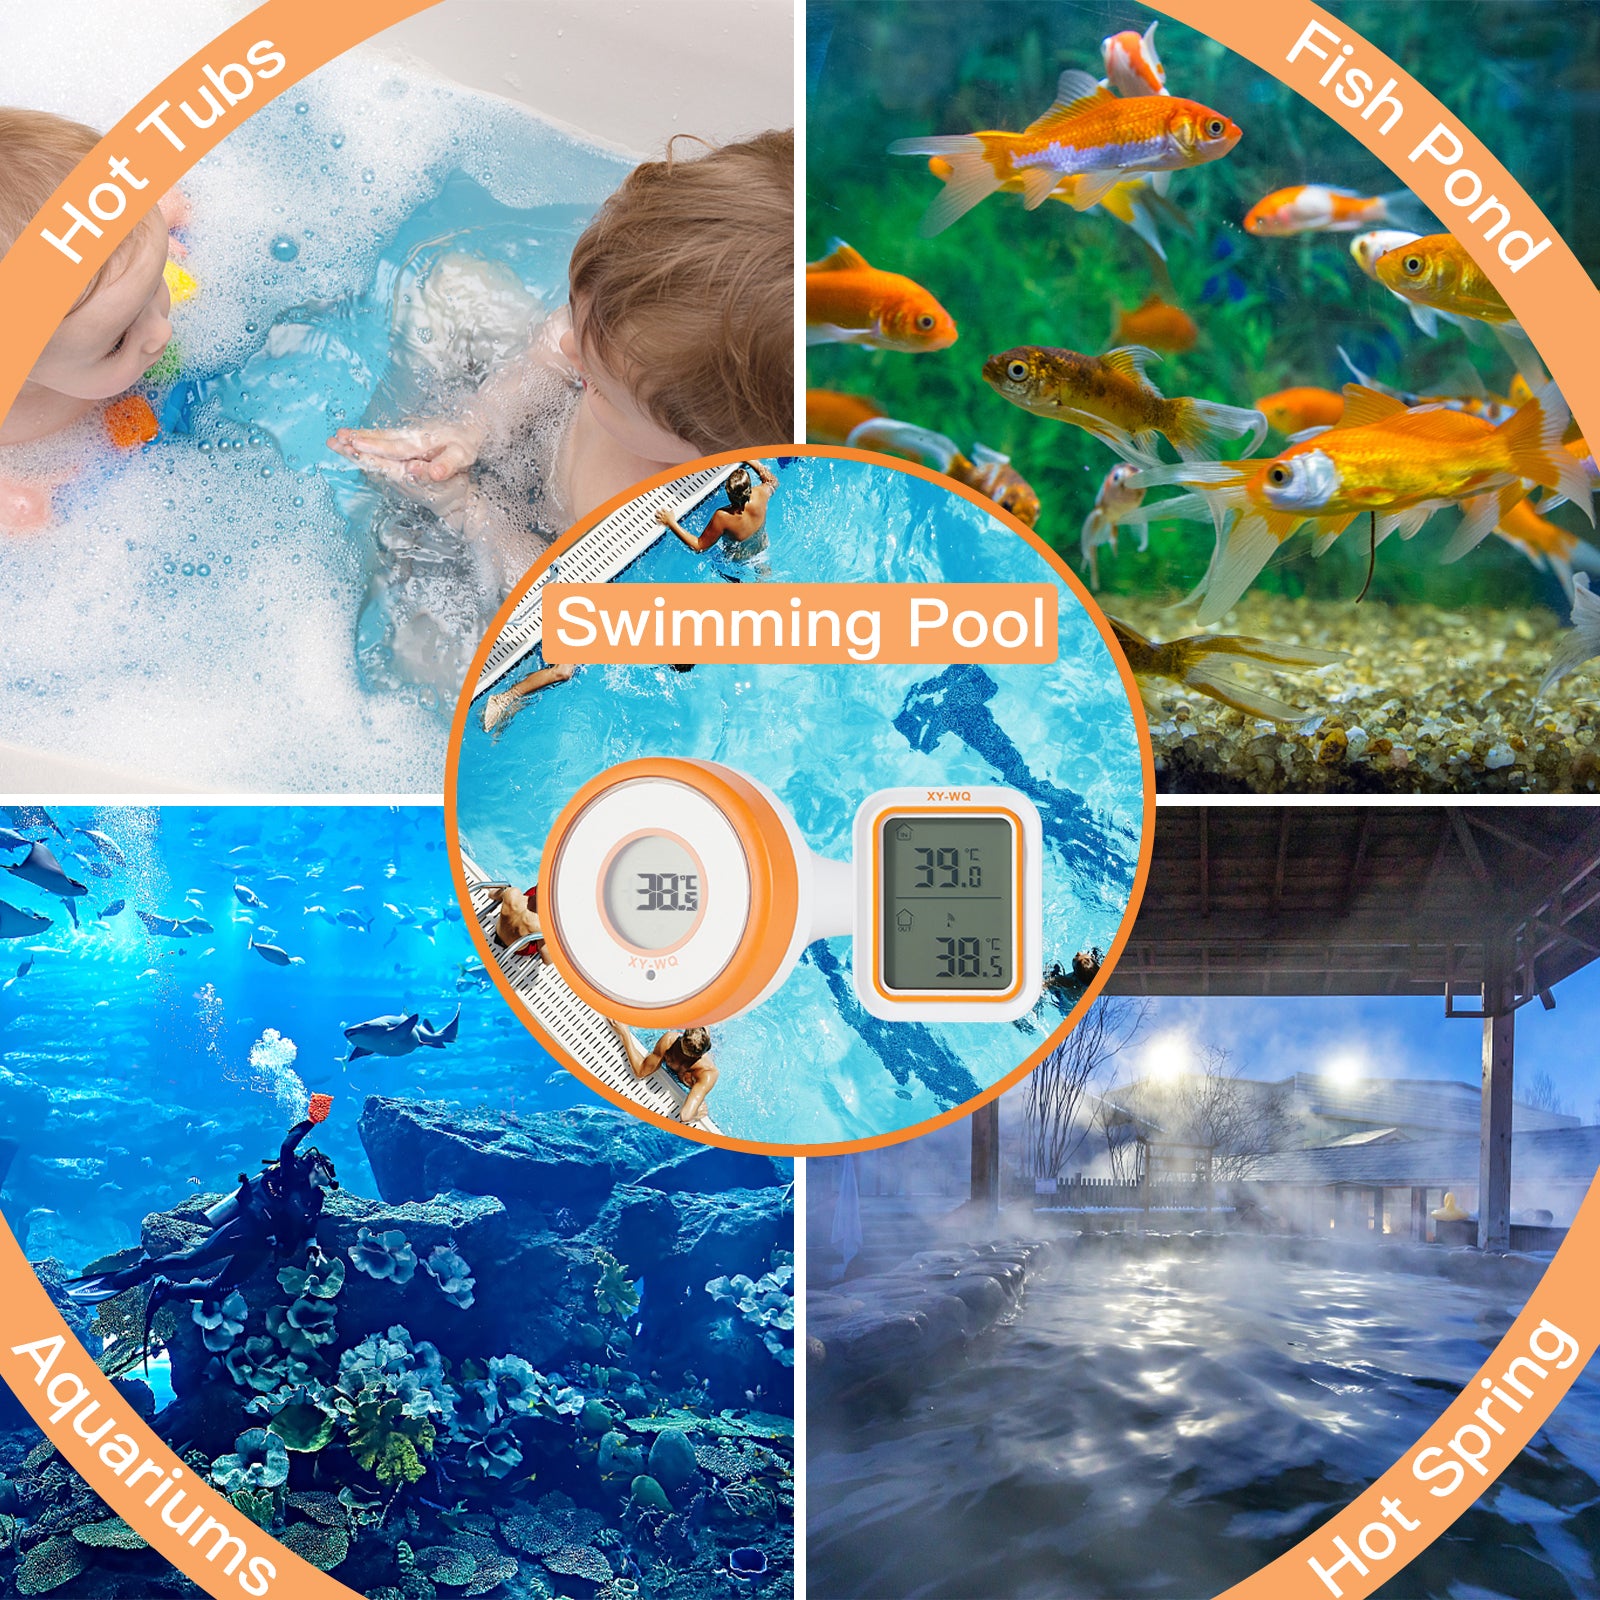 XY-WQ Wireless Pool Thermometer Floating Easy Read, Remote Digital Pool  Thermometer for Swimming Pool, Koi Ponds, and Hot Tubs (XY-P01W, Orange